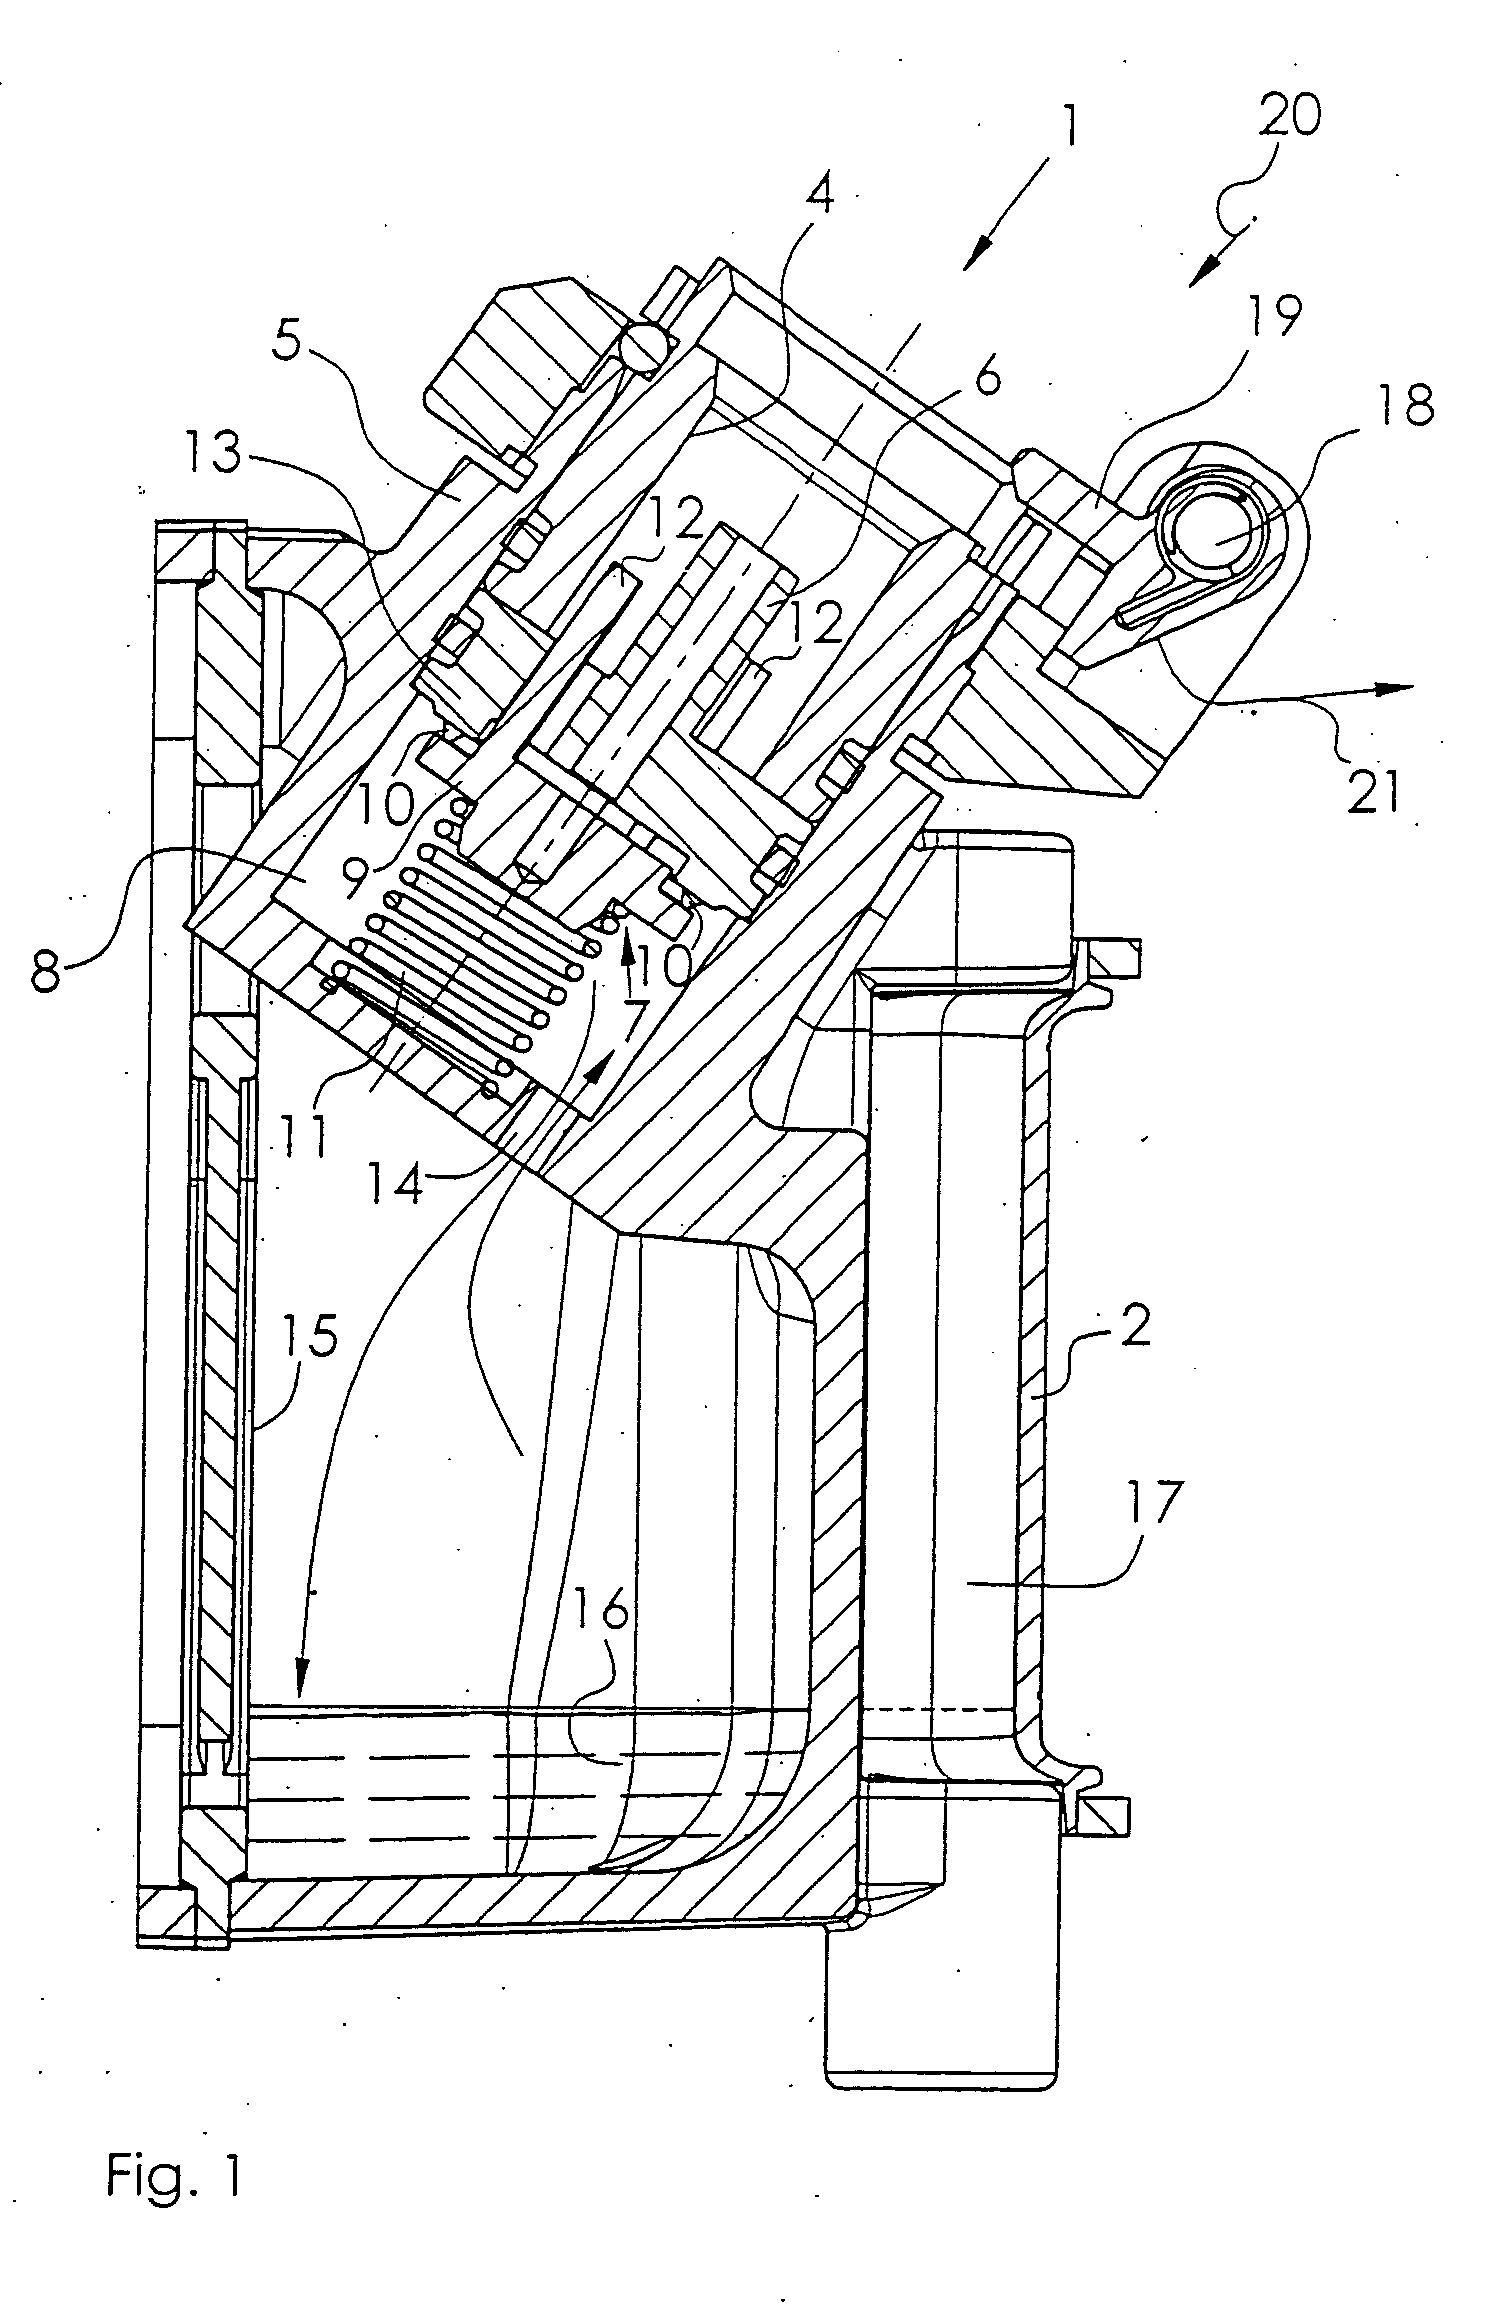 Filling device for an anesthetic evaporator